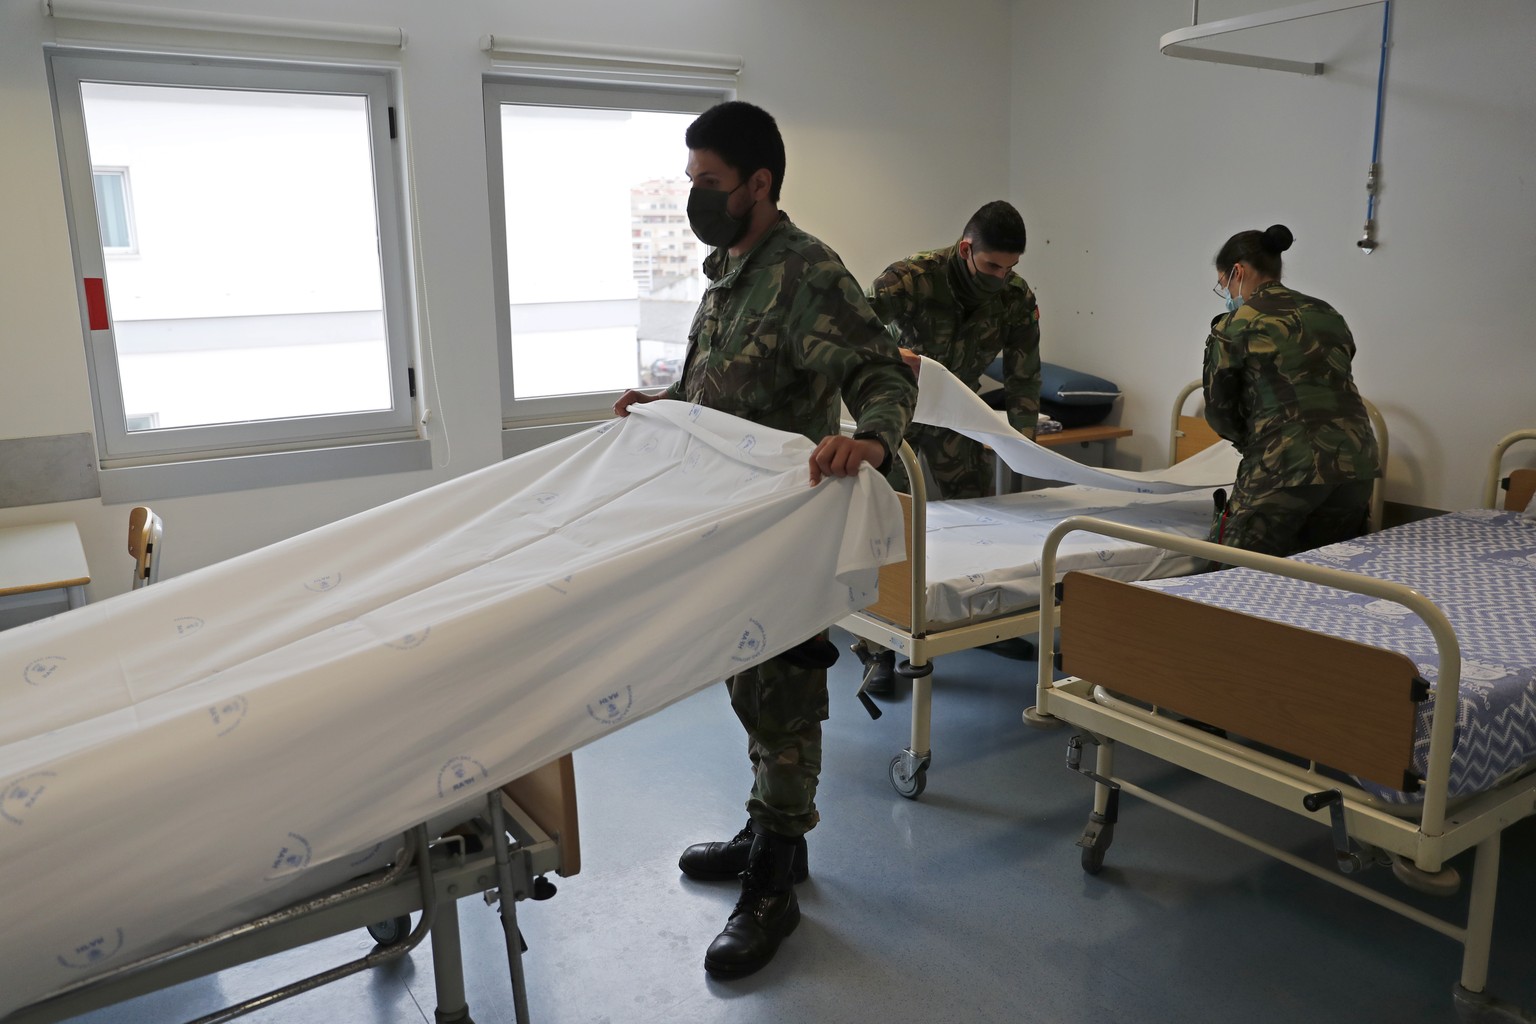 Soldiers prepare beds in a new COVID-19 ward being set up at the Military Hospital in Lisbon, Tuesday, Jan. 26, 2021. The military hospital is expanding it&#039;s number of beds available to take COVI ...